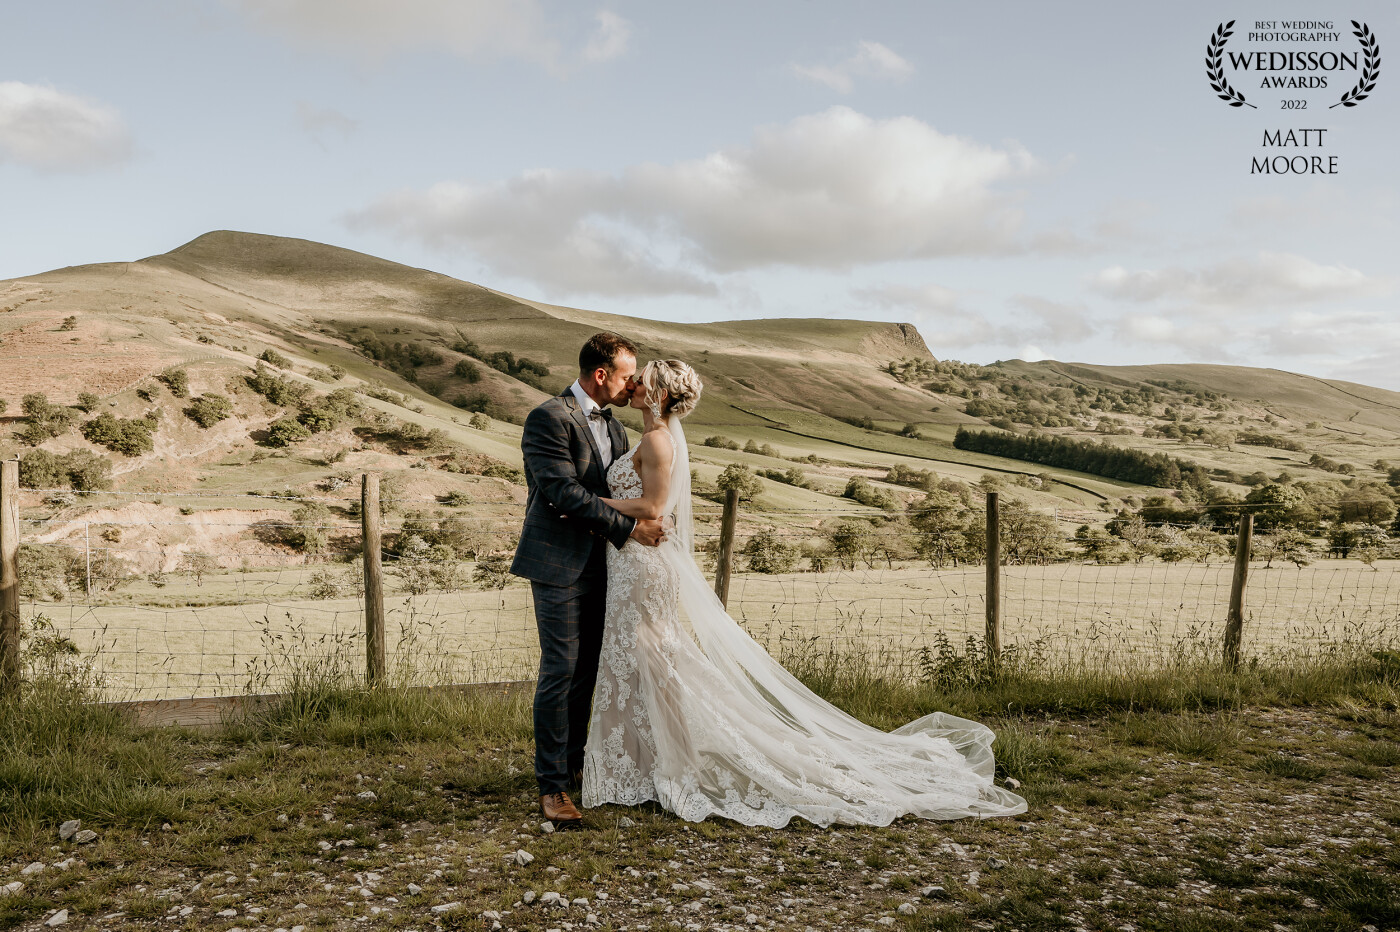 Carl and Jenny made Derbyshire's scenery complete with their addictive personalities and amazing looks - This was a great day and coupled with an amazing backdrop was just mint!